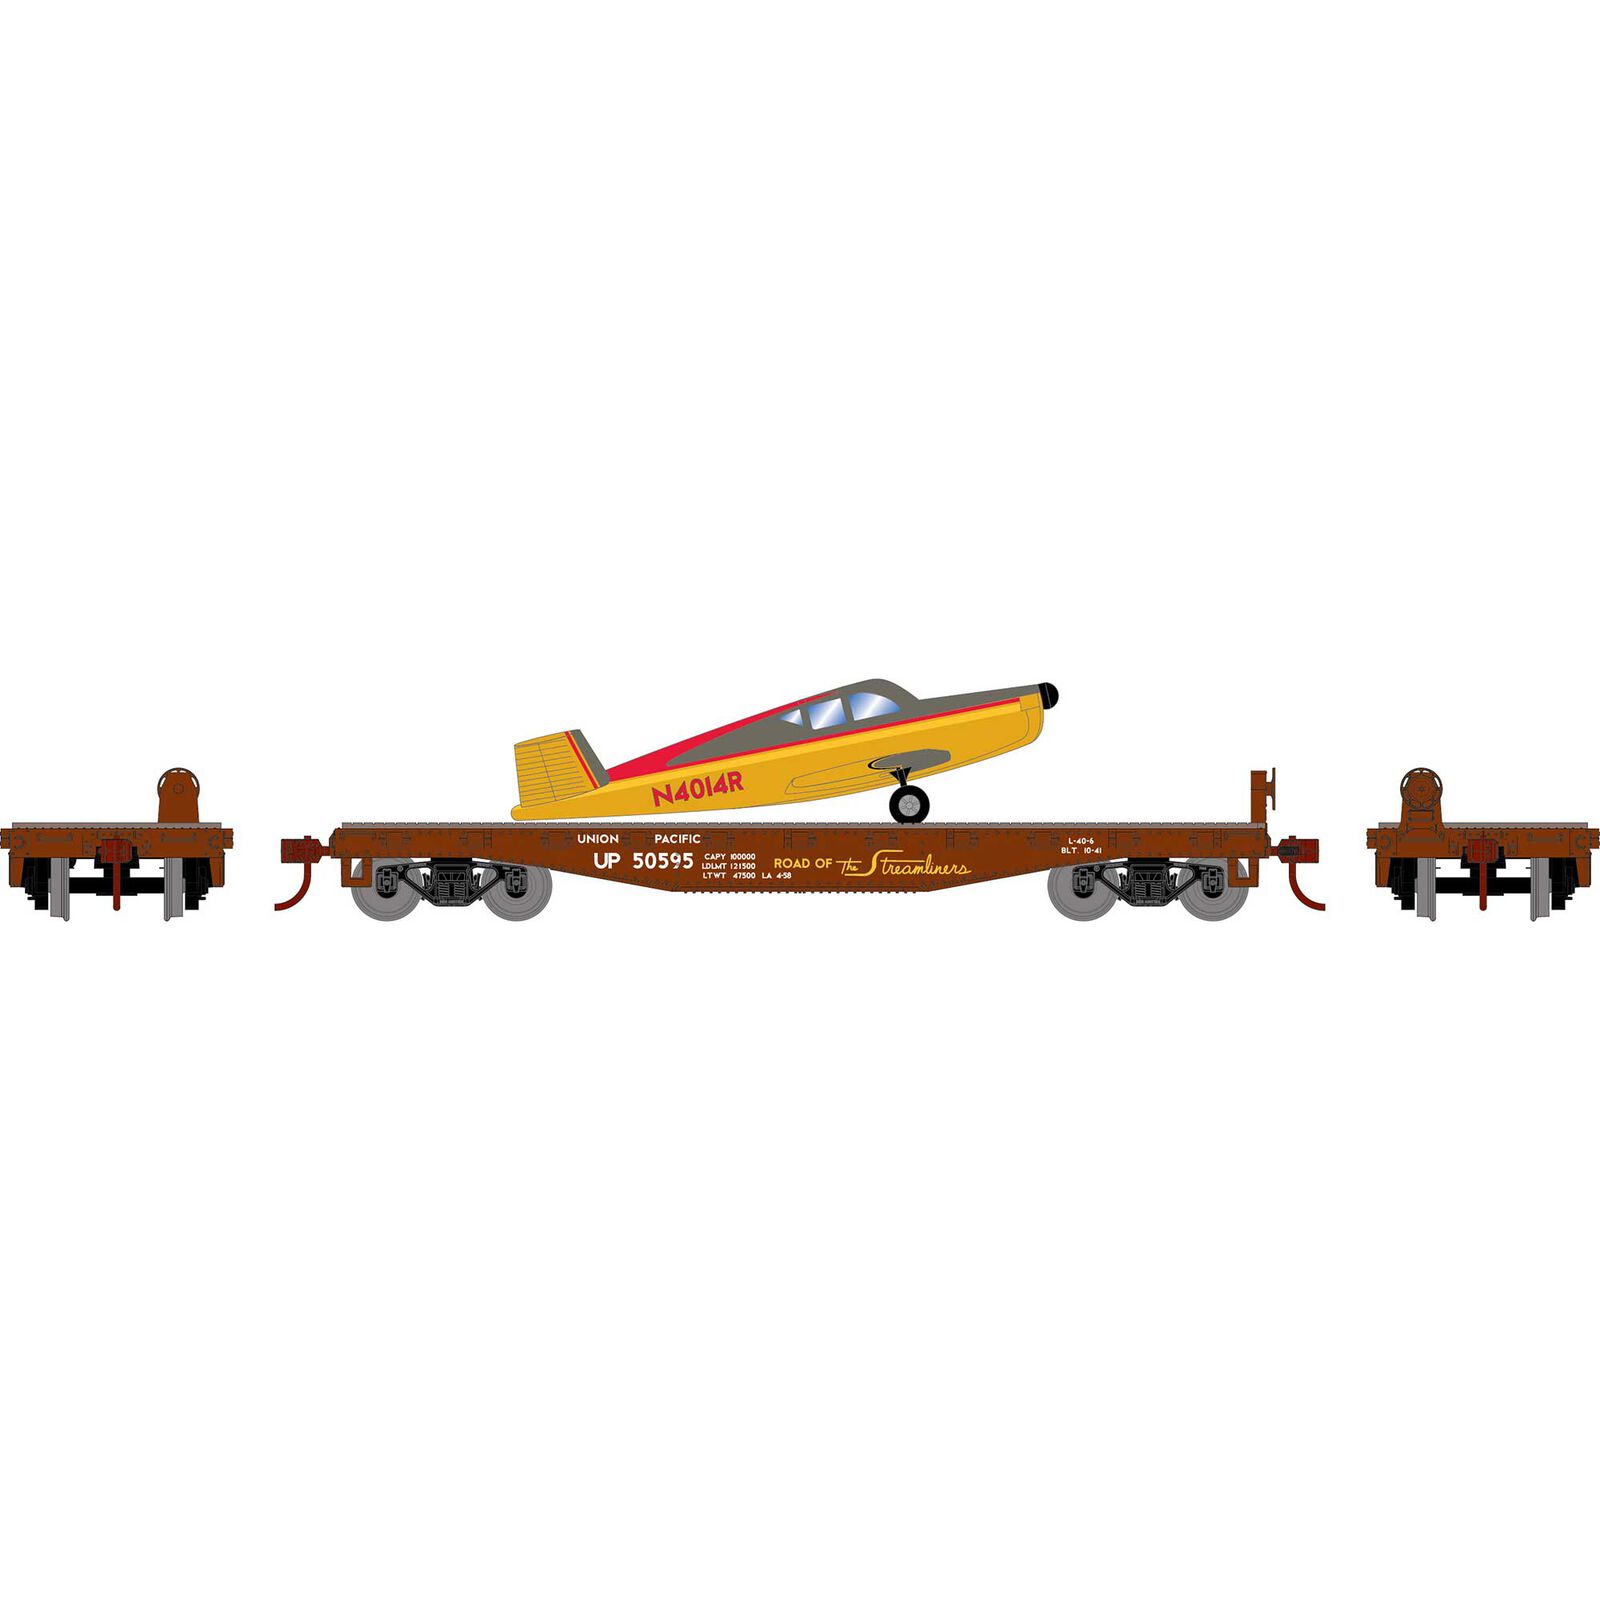 HO 40' Flat Car with Plane, UP # 50595